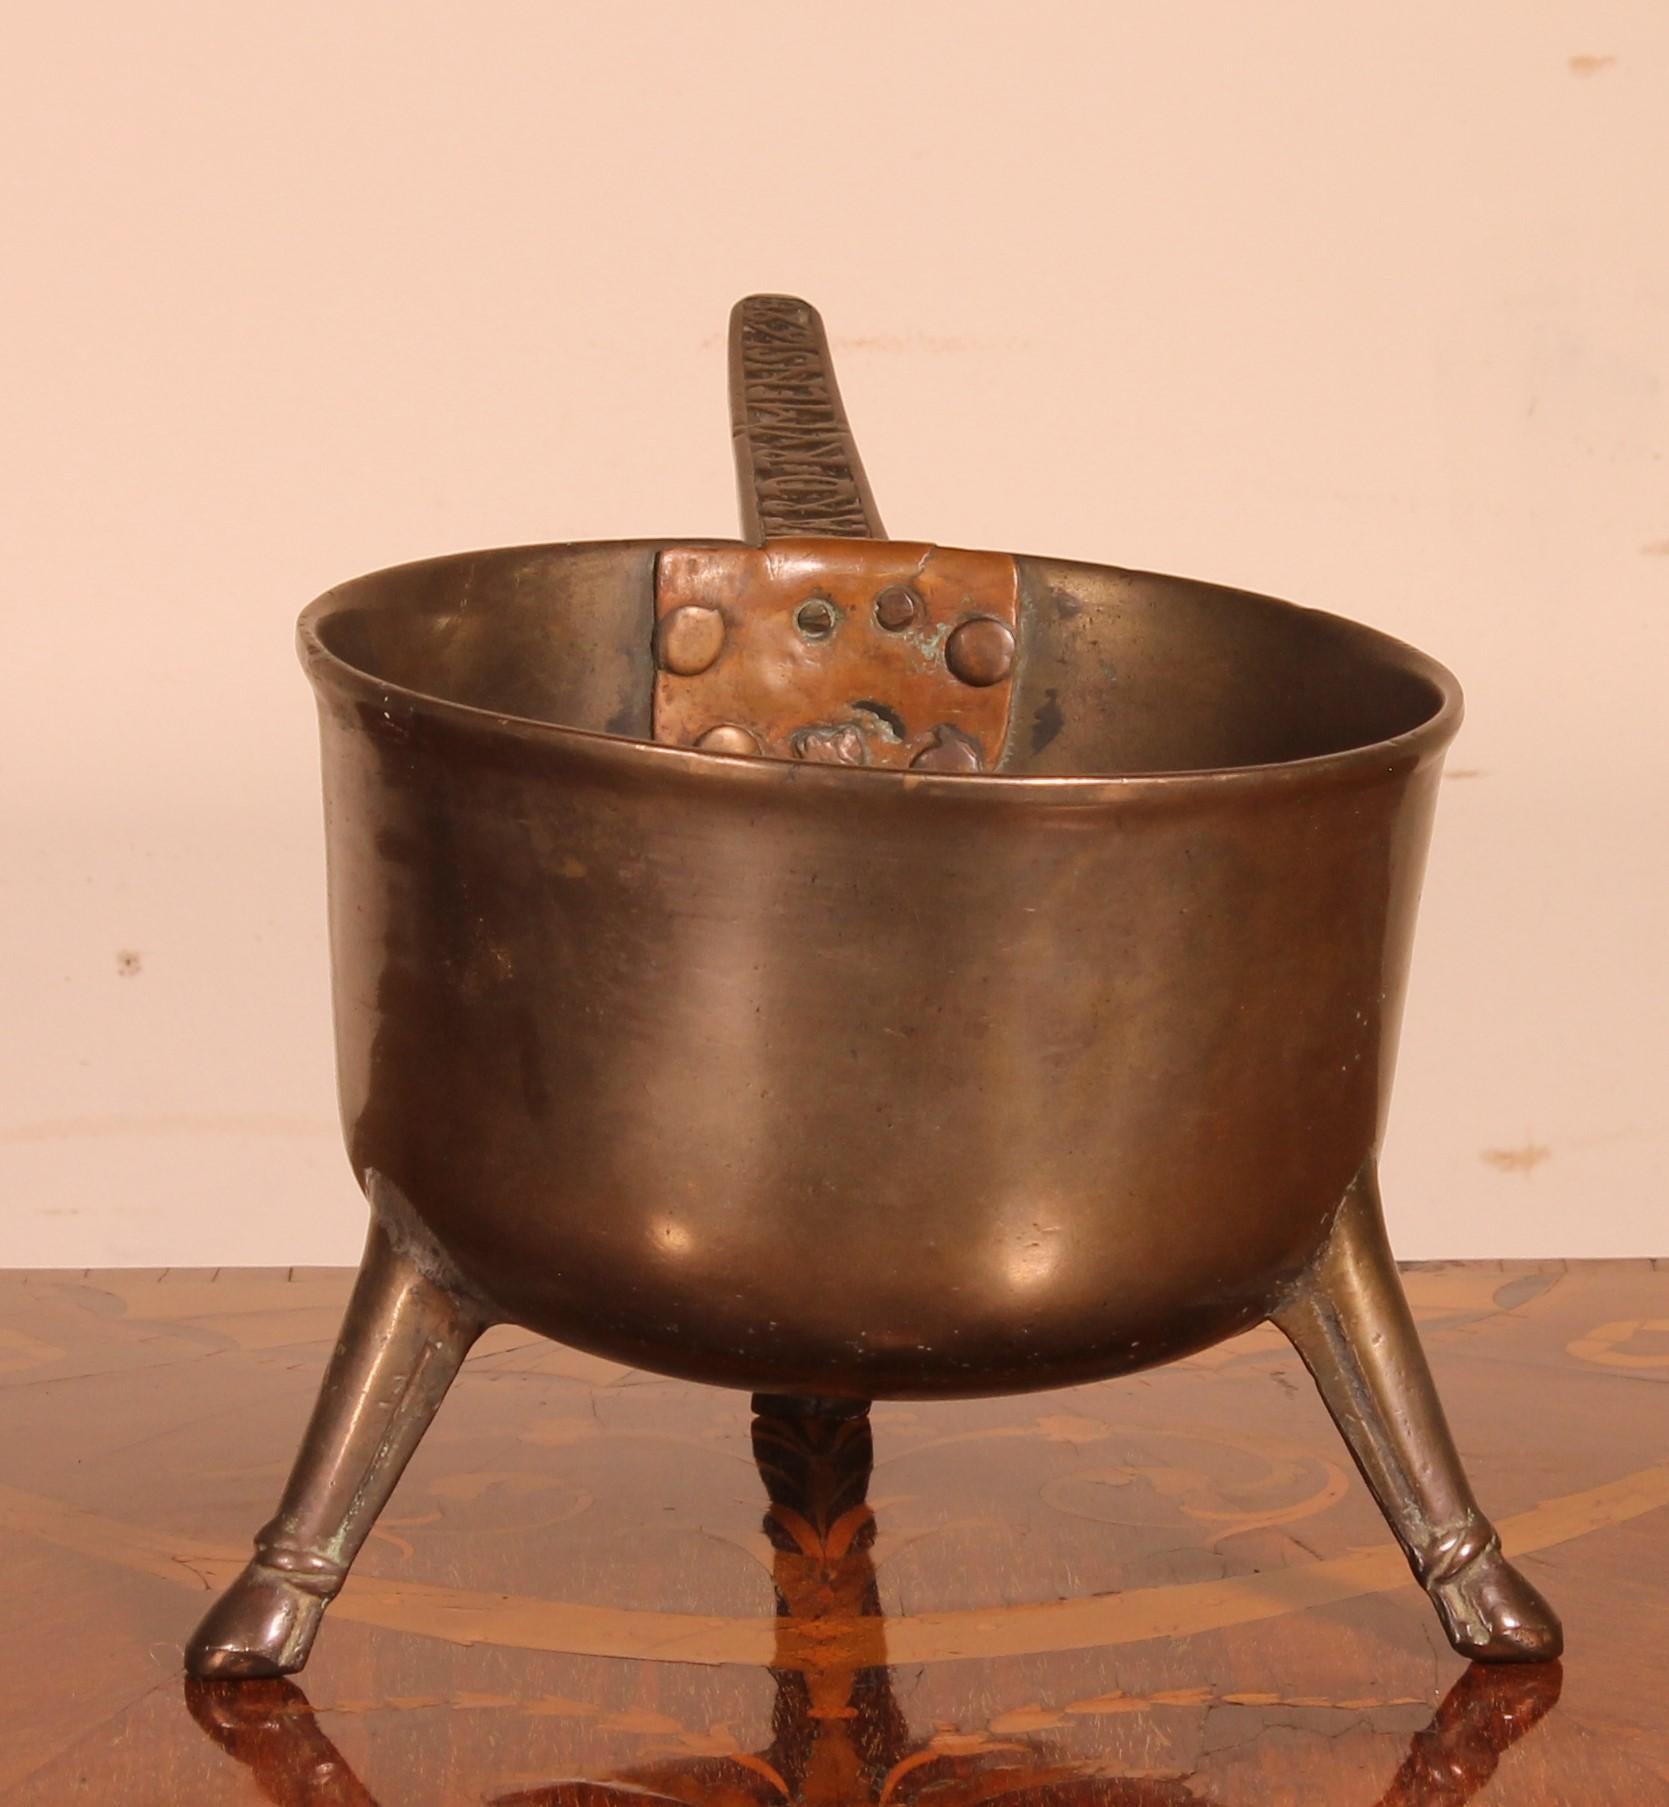 17th century tripod apothecary skillet dated 1698 by Ward Rymens.
The skillet is in superb condition and has had a restoration on one of the feet.
bronze with a very beautiful patina.